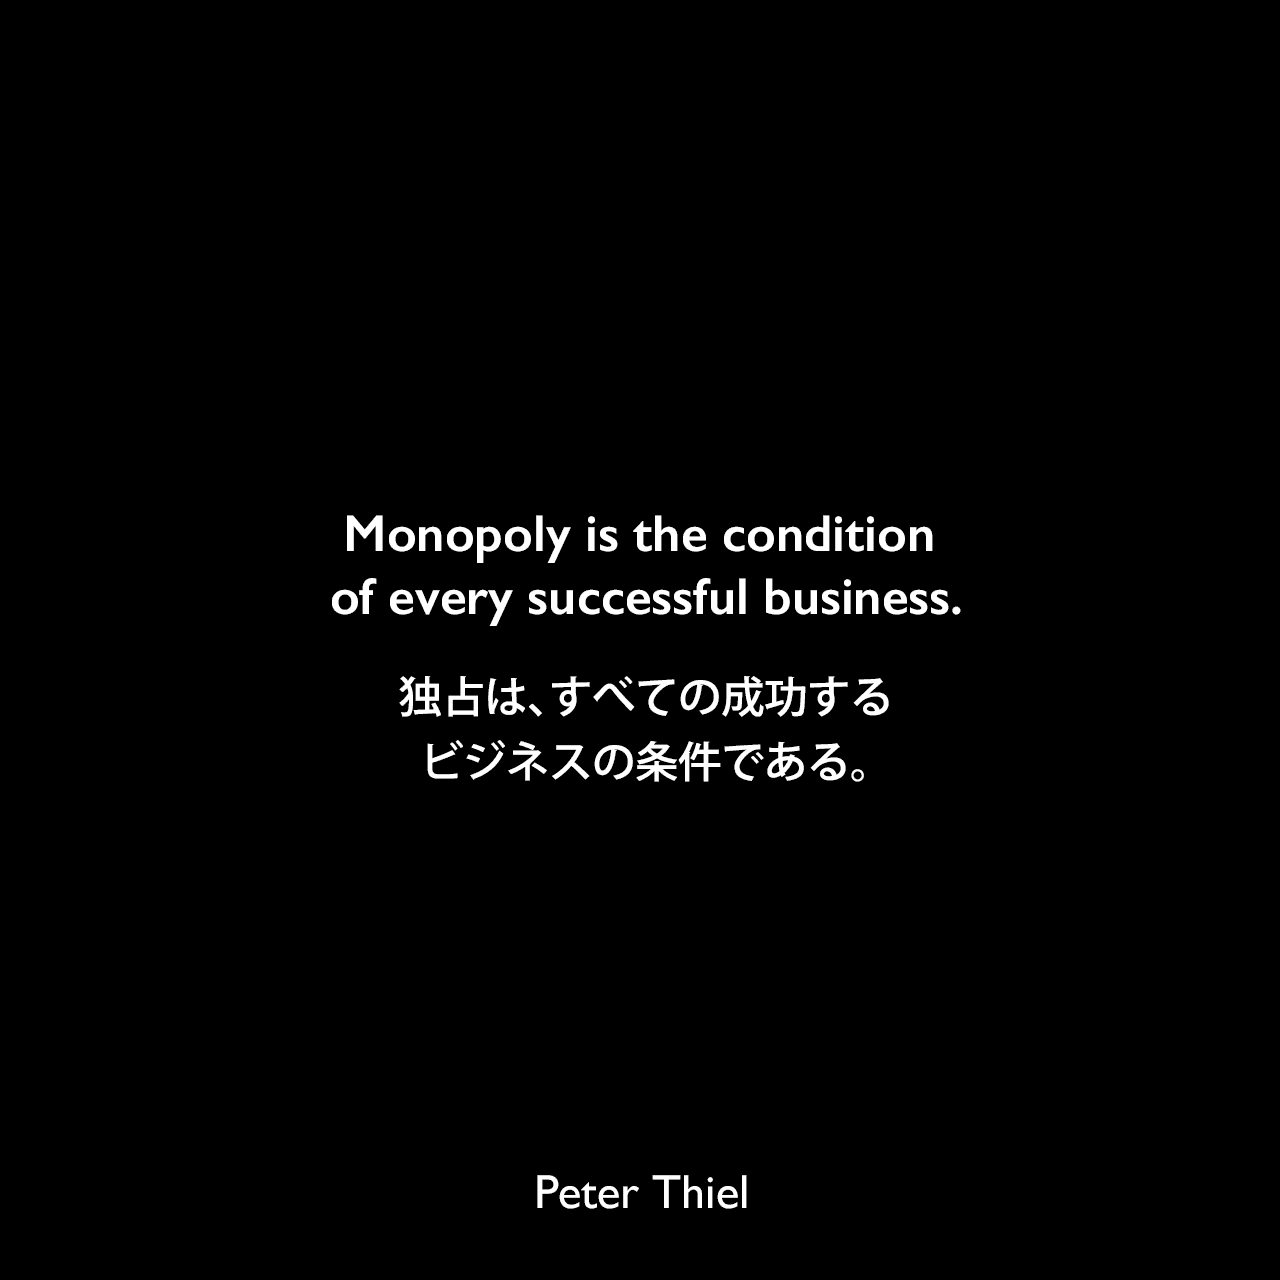 Monopoly is the condition of every successful business.独占は、すべての成功するビジネスの条件である。- ピーター・ティールの本「Zero to One」よりPeter Thiel